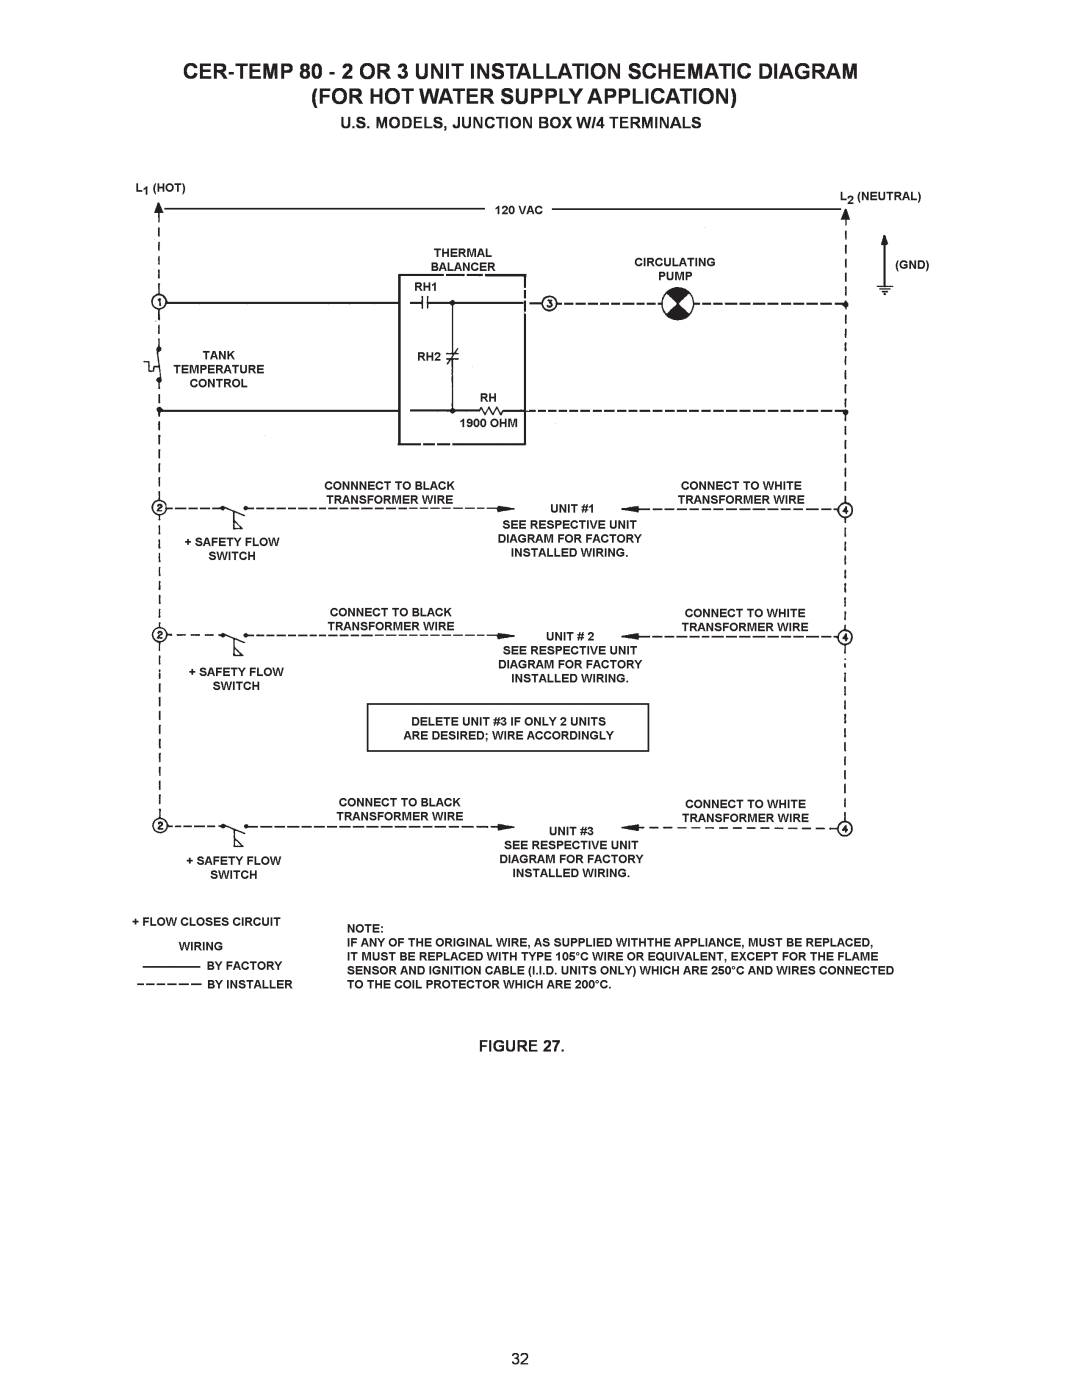 A.O. Smith HW 610 warranty CER-TEMP 80 - 2 OR 3 UNIT INSTALLATION SCHEMATIC DIAGRAM, For Hot Water Supply Application 